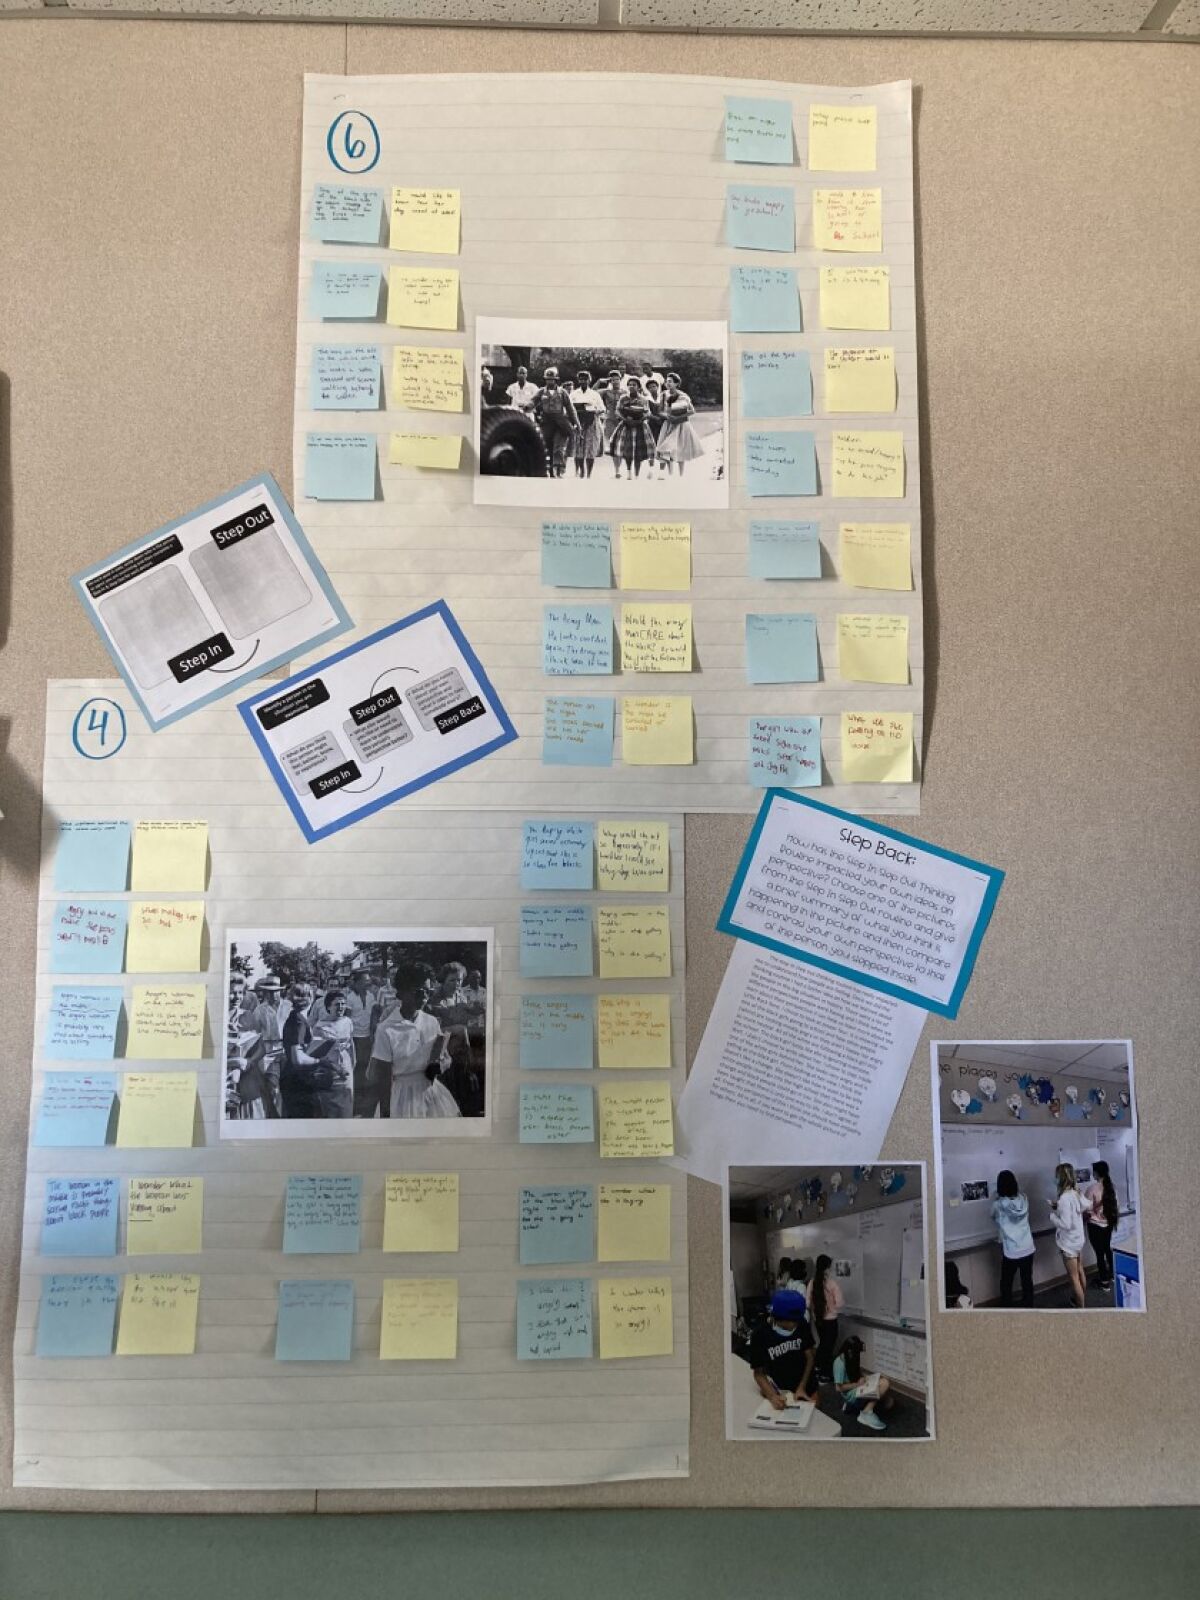 Students reflected on images of the Little Rock Nine.